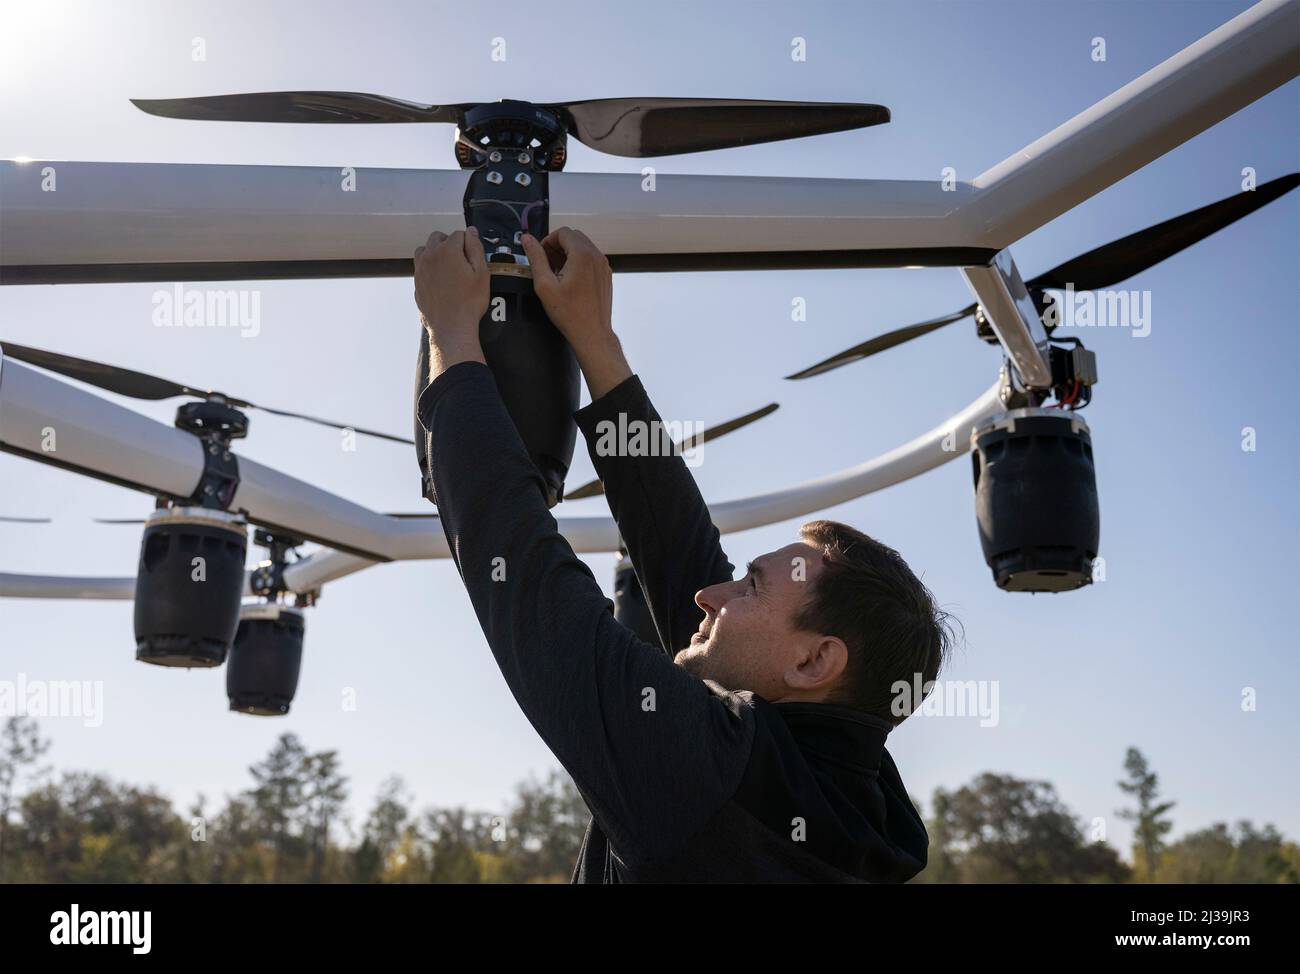 Elgin AFB, United States of America. 04 April, 2022. Brad Bollig, a LIFT team member, secures a battery to one of the Lift Hexa, electric, vertical takeoff and landing aircraft, before the first unmanned flight test via remote control at Elgin Air Force Base, April 4, 2022 in Elgin AFB, Florida. The aircraft, which used 18 motors and propellers, flew for approximately 10 minutes and reached a height of about 50 feet.  Credit: Samuel King Jr./US Air Force Photo/Alamy Live News Stock Photo